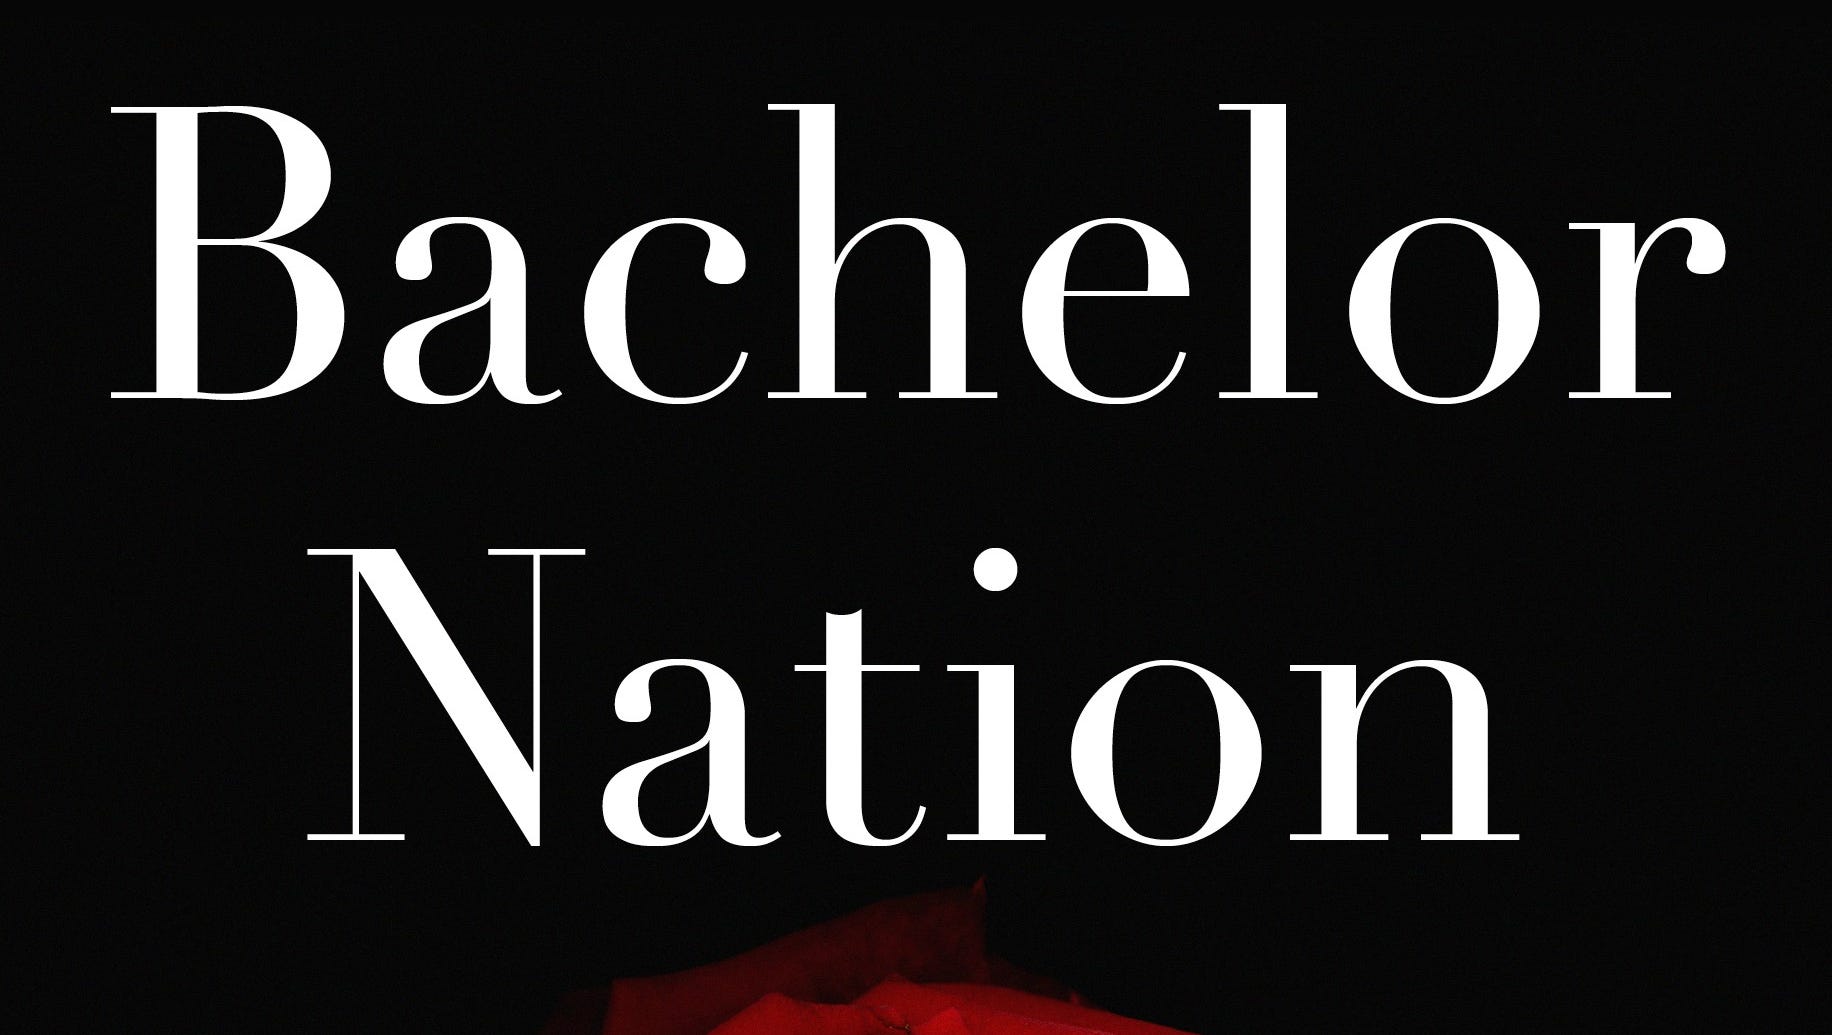 'Bachelor Nation' by Amy Kaufman 5 of the book's most shocking claims